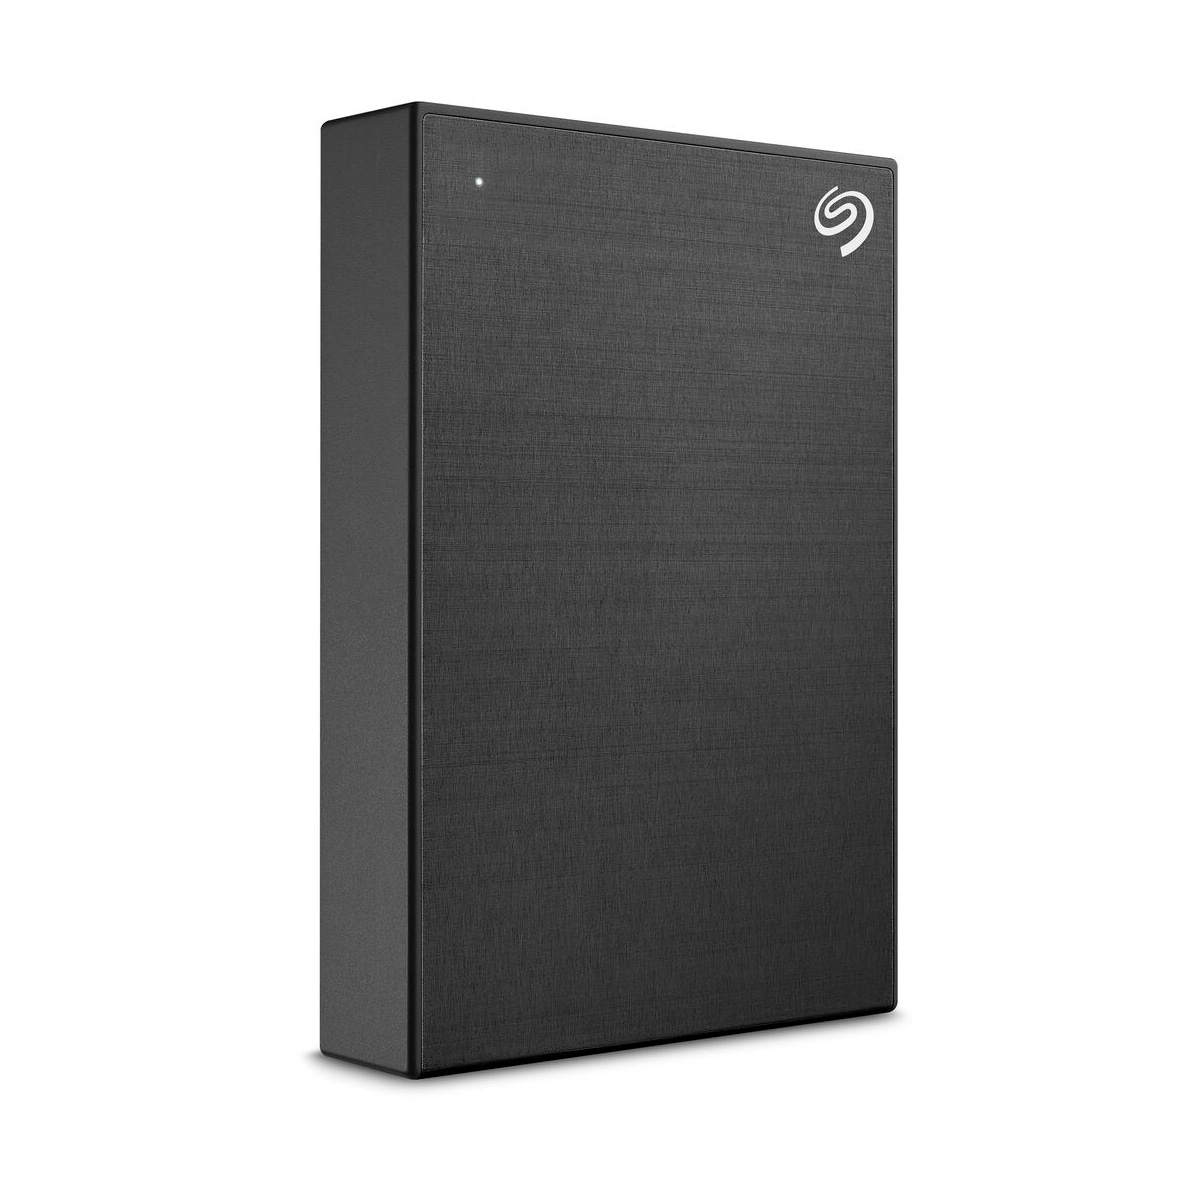 Ổ cứng HDD Seagate OneTouch